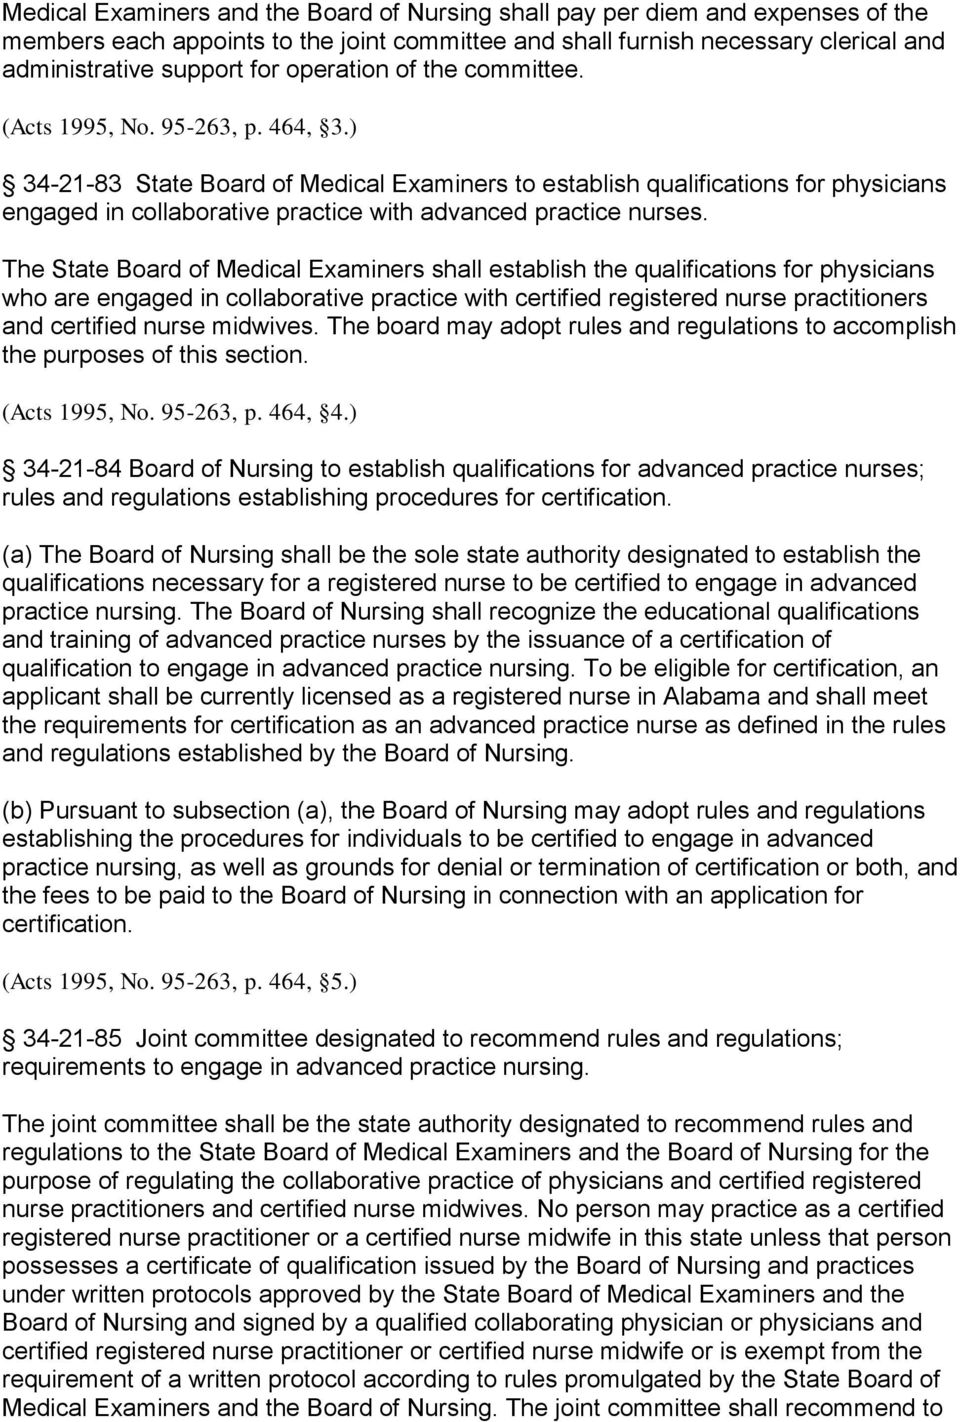 ) 34-21-83 State Board of Medical Examiners to establish qualifications for physicians engaged in collaborative practice with advanced practice nurses.